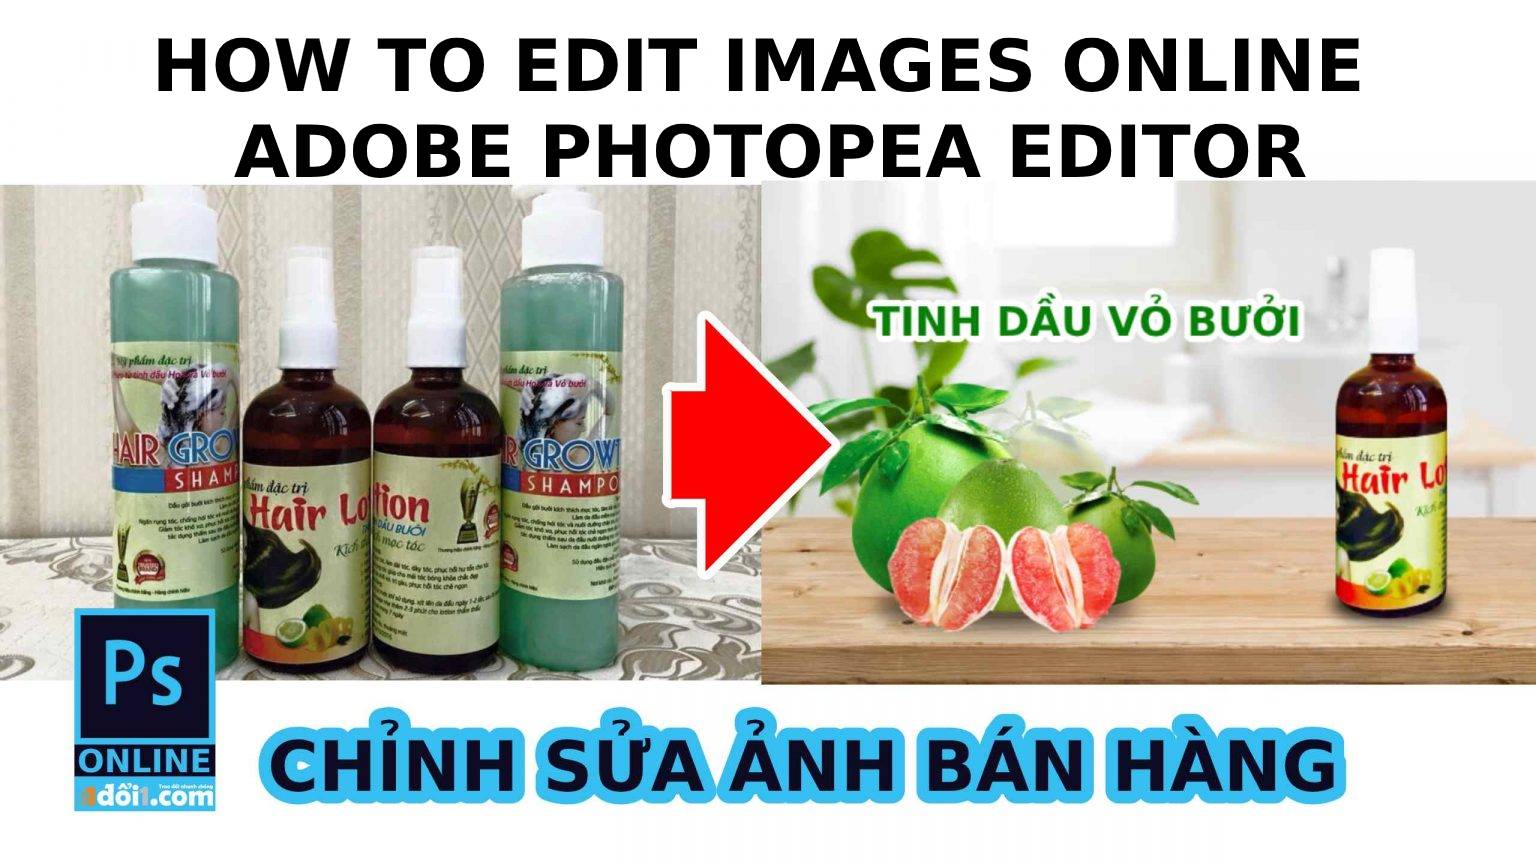 edit images online 1 How to edit images online adobe photopea editor #4